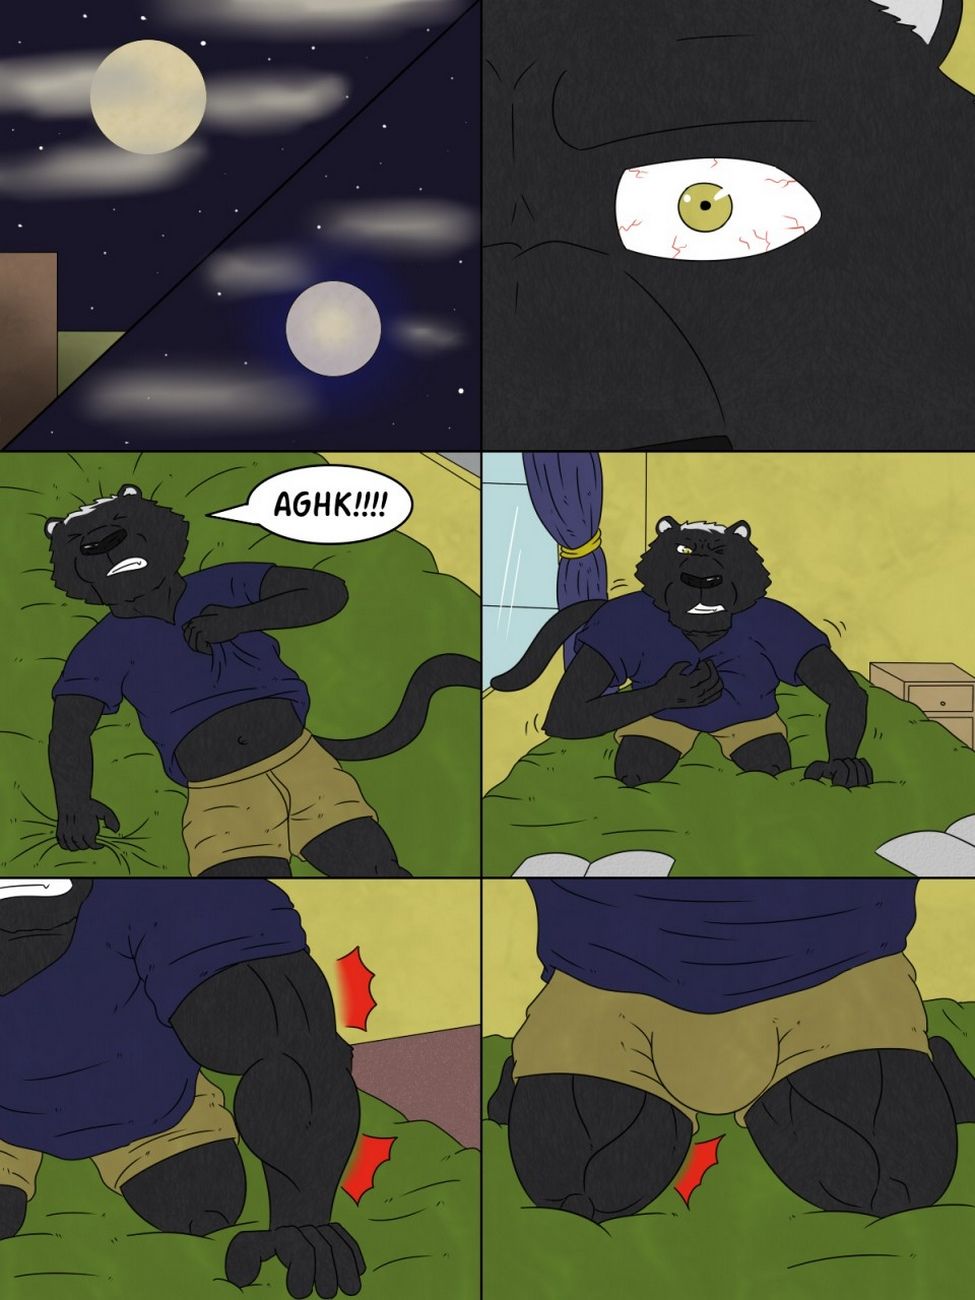 A Growth Under The Moonlight page 1